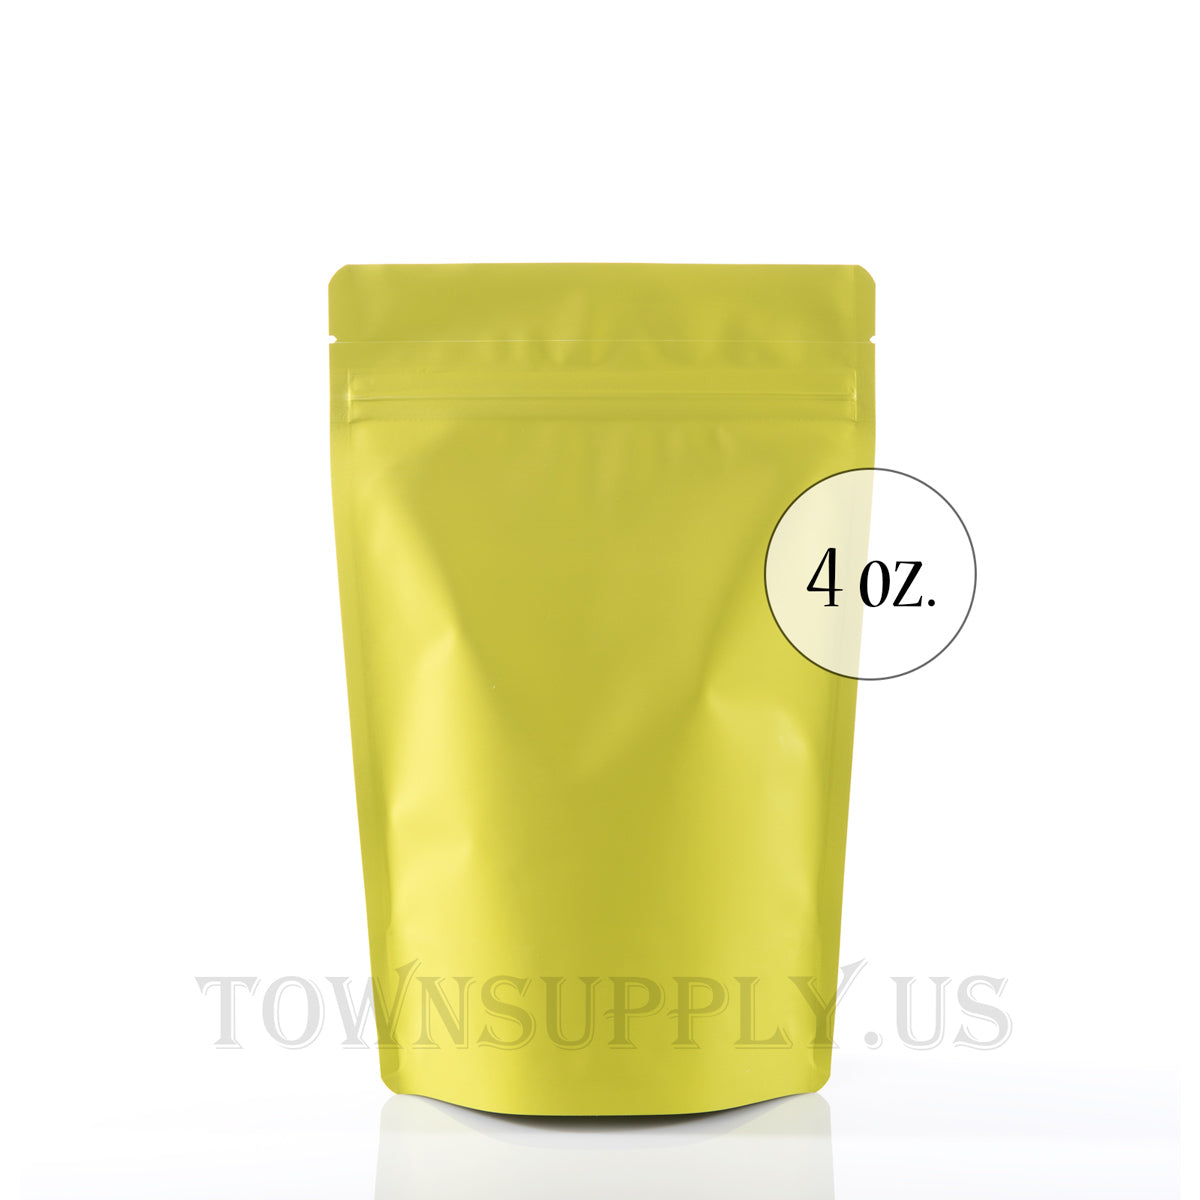 Southwest Polybag: 8oz (225g) Stand Up Zip Pouches - WITH VALVE